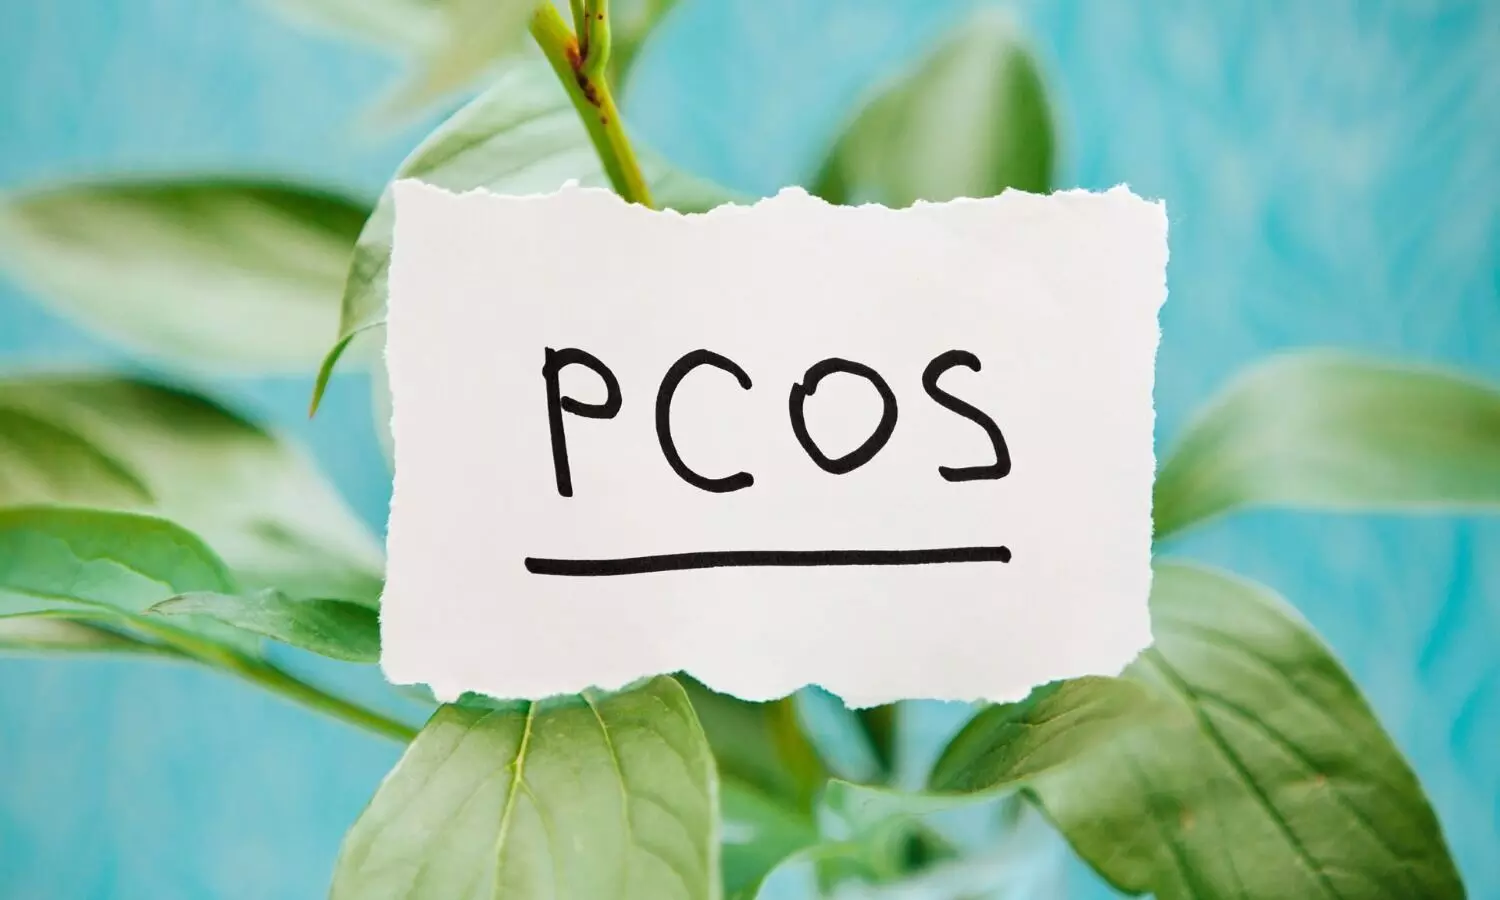 Herbal treatment effective for management of PCOS: Study